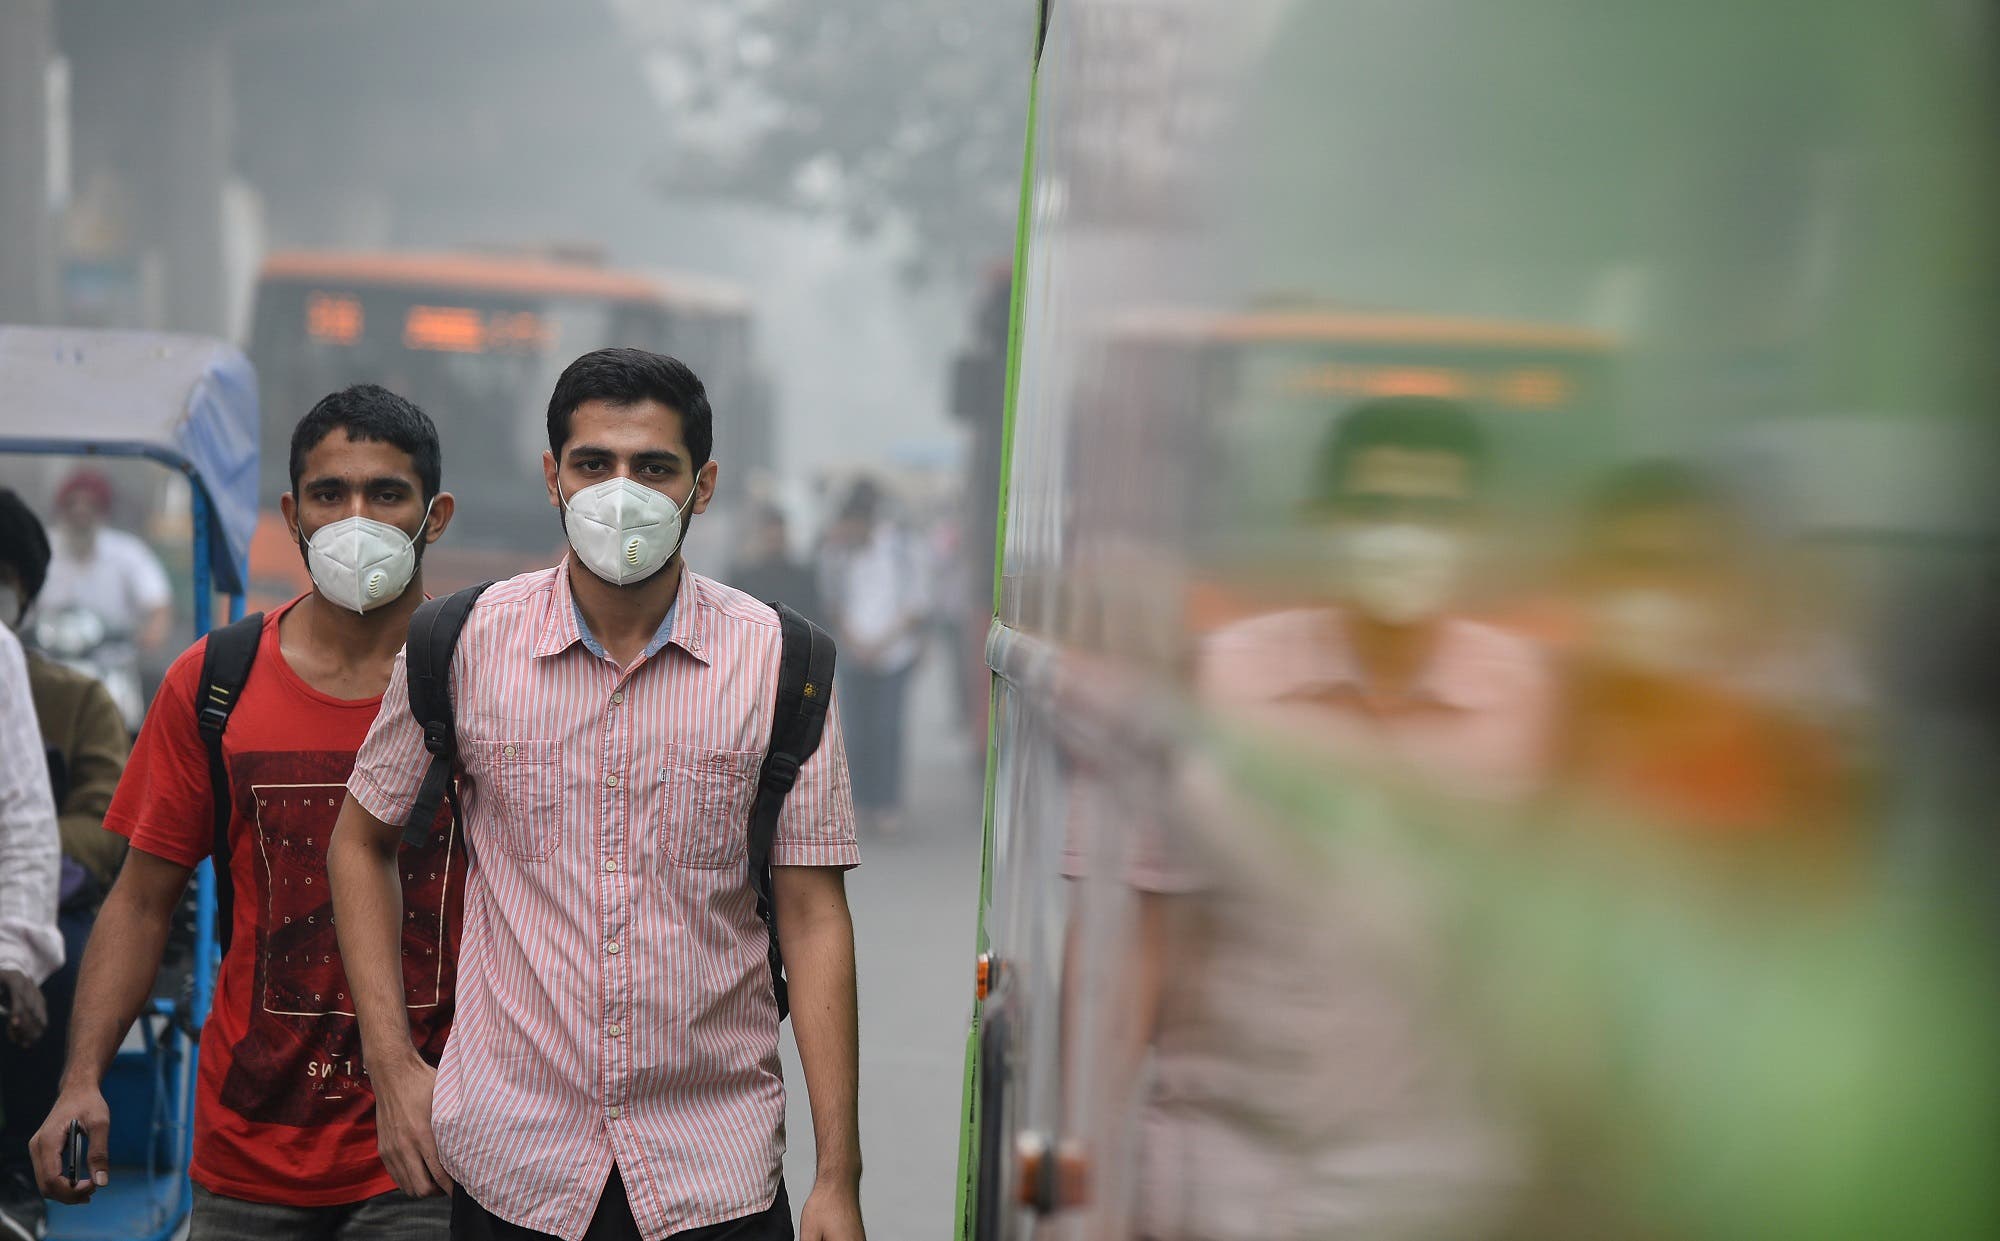 Indian commuters wear masks as they walk along a road amid heavy smog in New Delhi on November 9, 2017. (AFP)